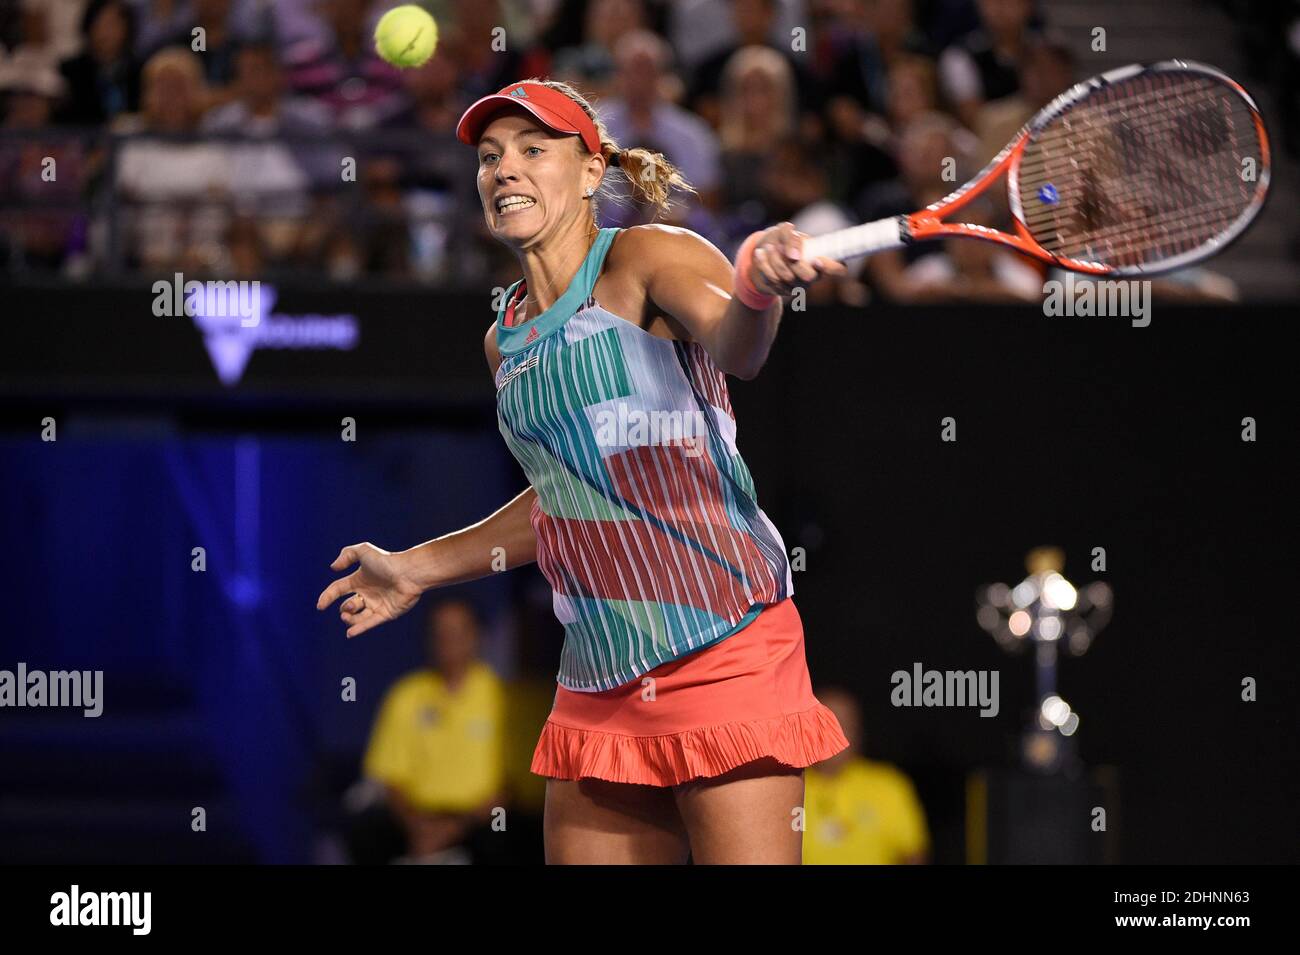 Angelique Kerber of Germany her first grand slam tittle against Serena Williams at the 2016 Australian Open at Melbourne Park Melbourne, AUSTRALIA, on January 30, 2016. Photo by Corinne Dubreuil/ABACAPRESS.COM